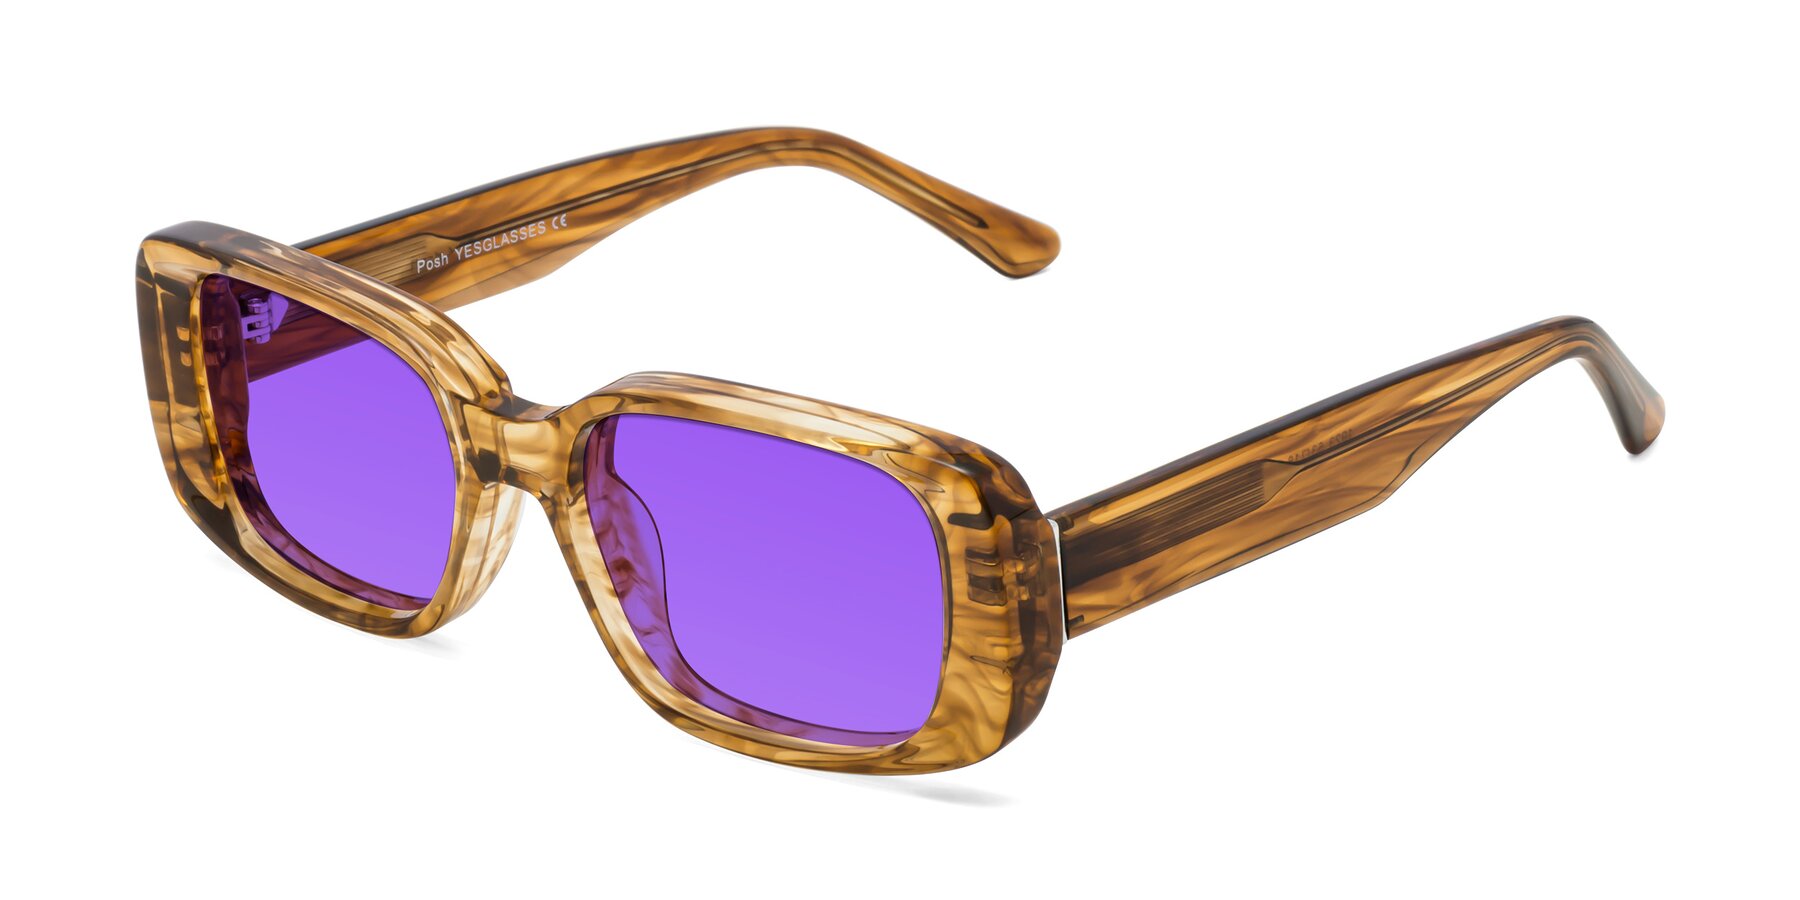 Angle of Posh in Stripe Amber with Purple Tinted Lenses